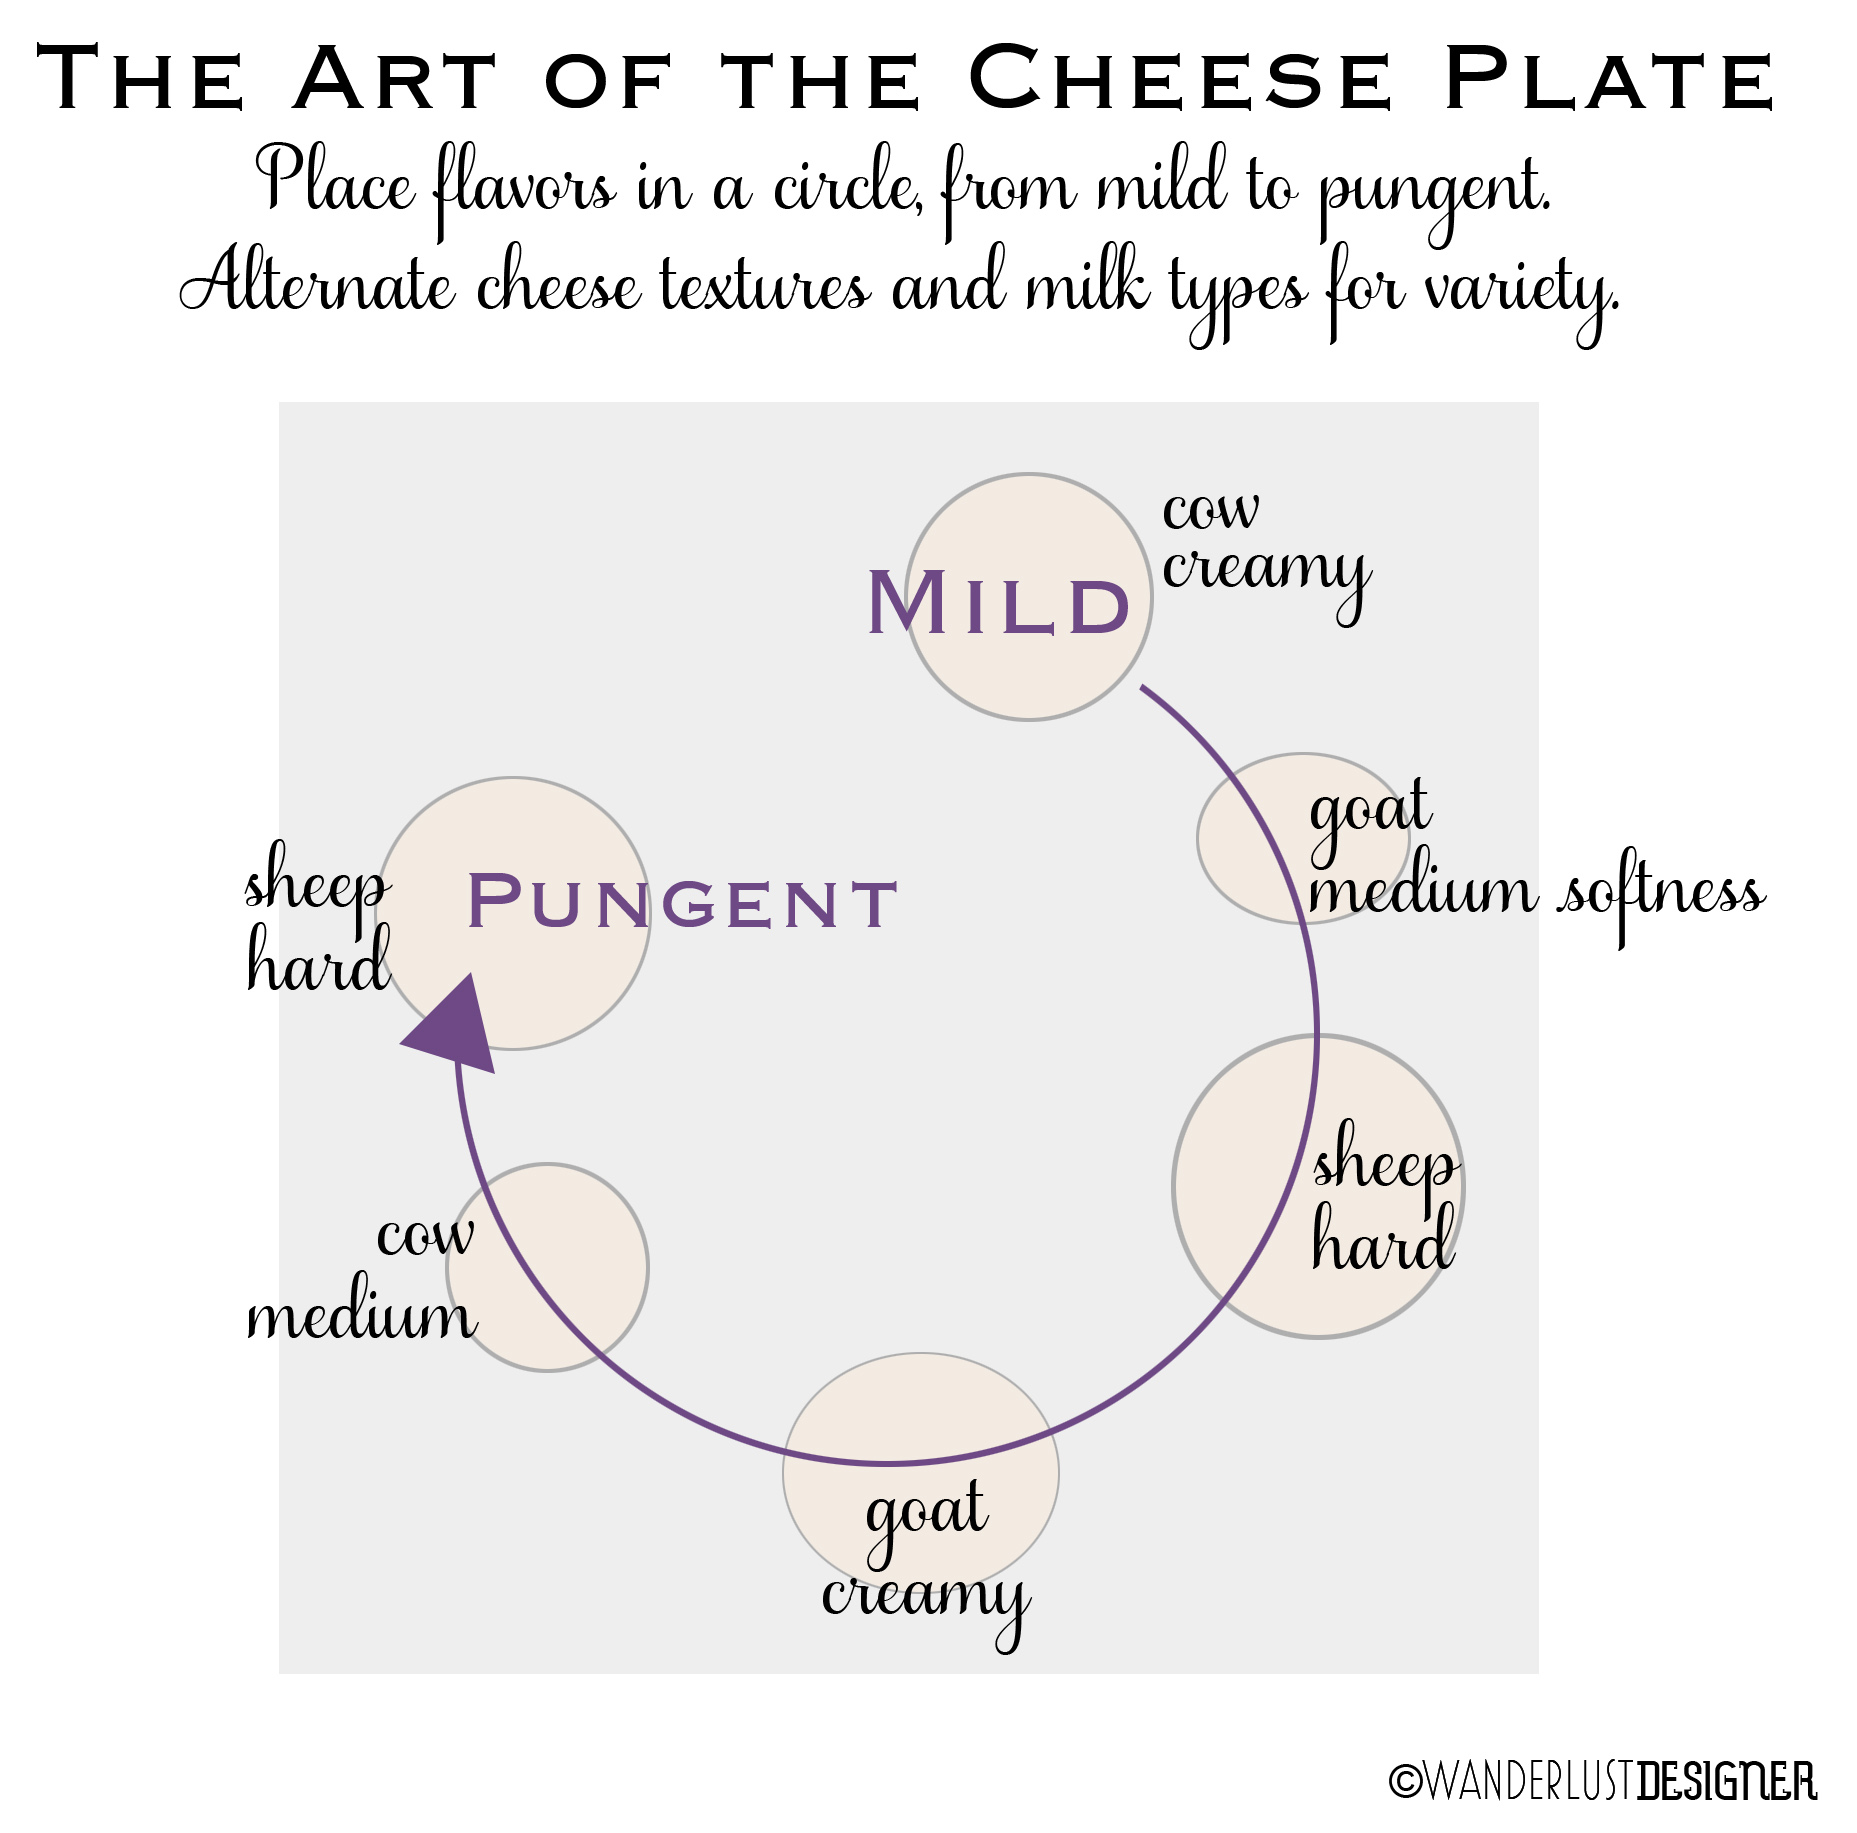 The Art of the Cheese Plate Diagram by Wanderlust Designer